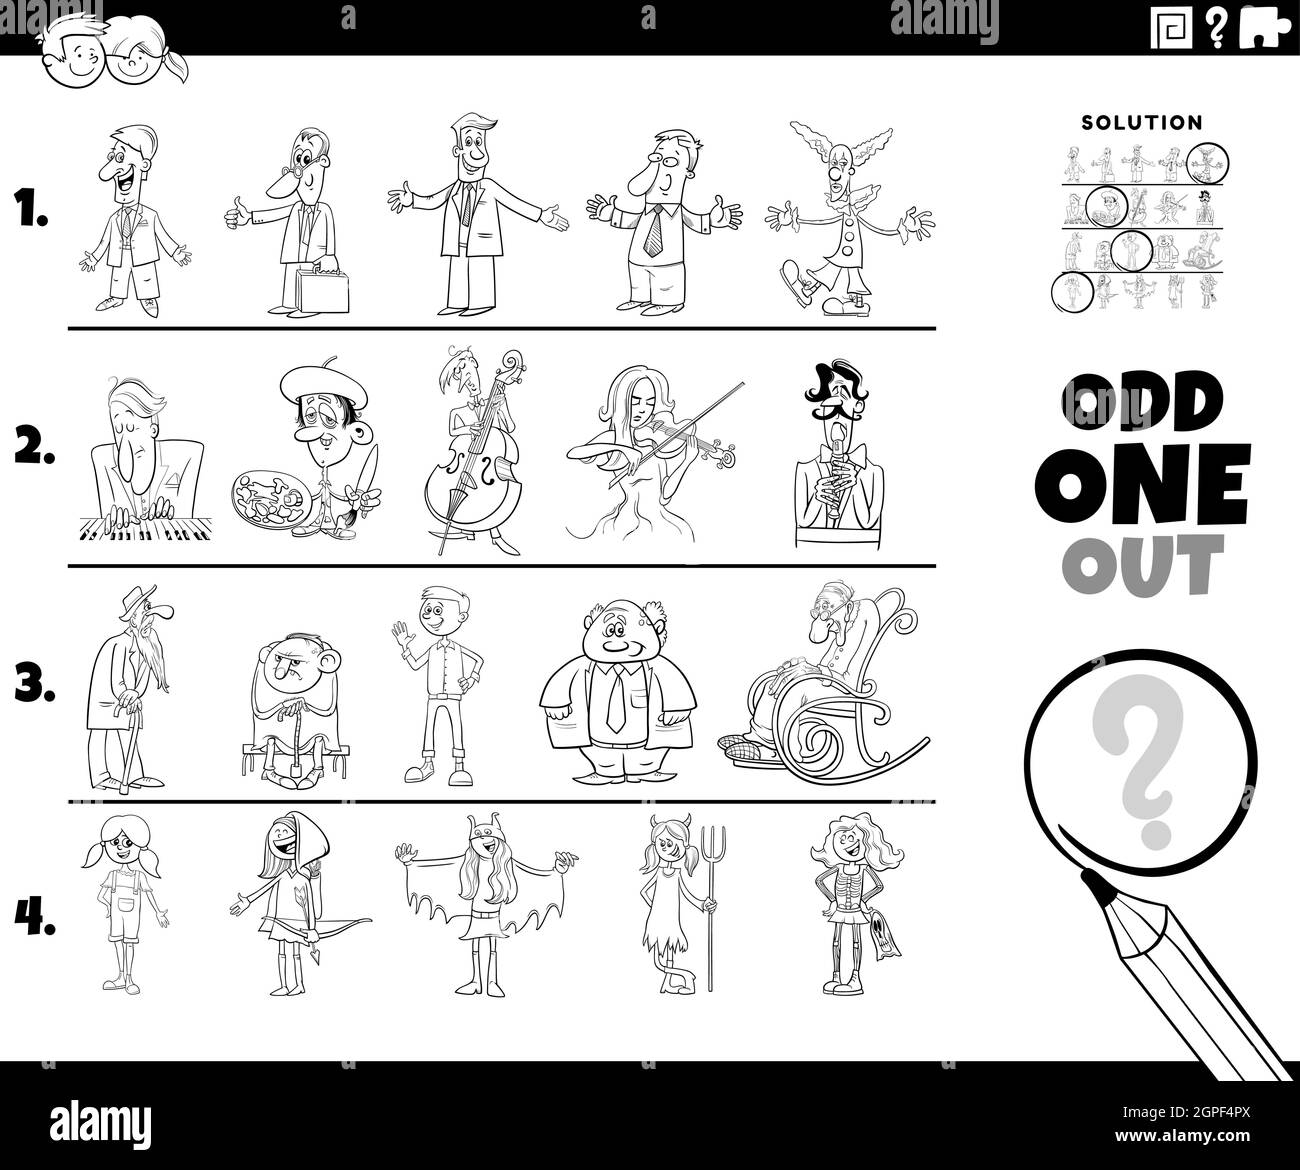 odd one out people character picture coloring book page Stock Vector